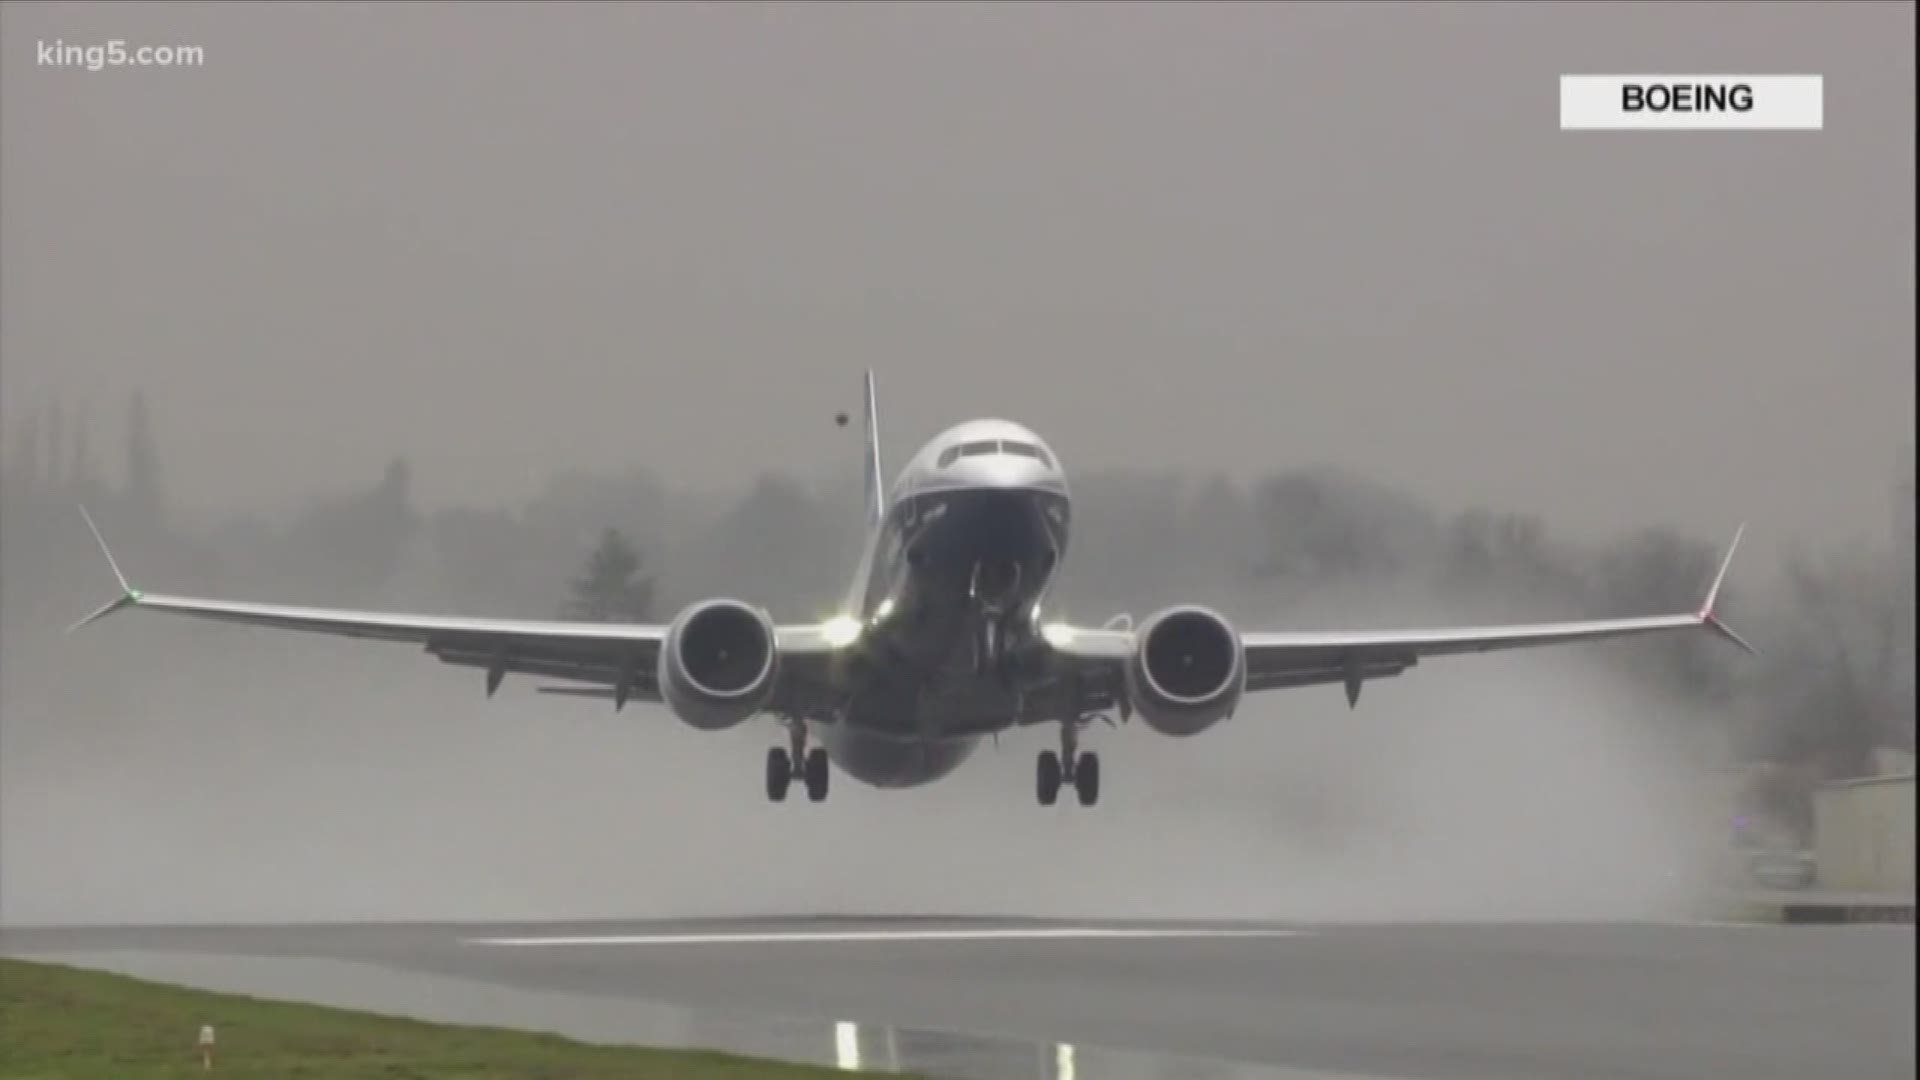 Boeing 737 MAX 8s and 9s are grounded worldwide. As KING 5's Natalie Swaby reports, this is the not the first widespread grounding for Boeing.